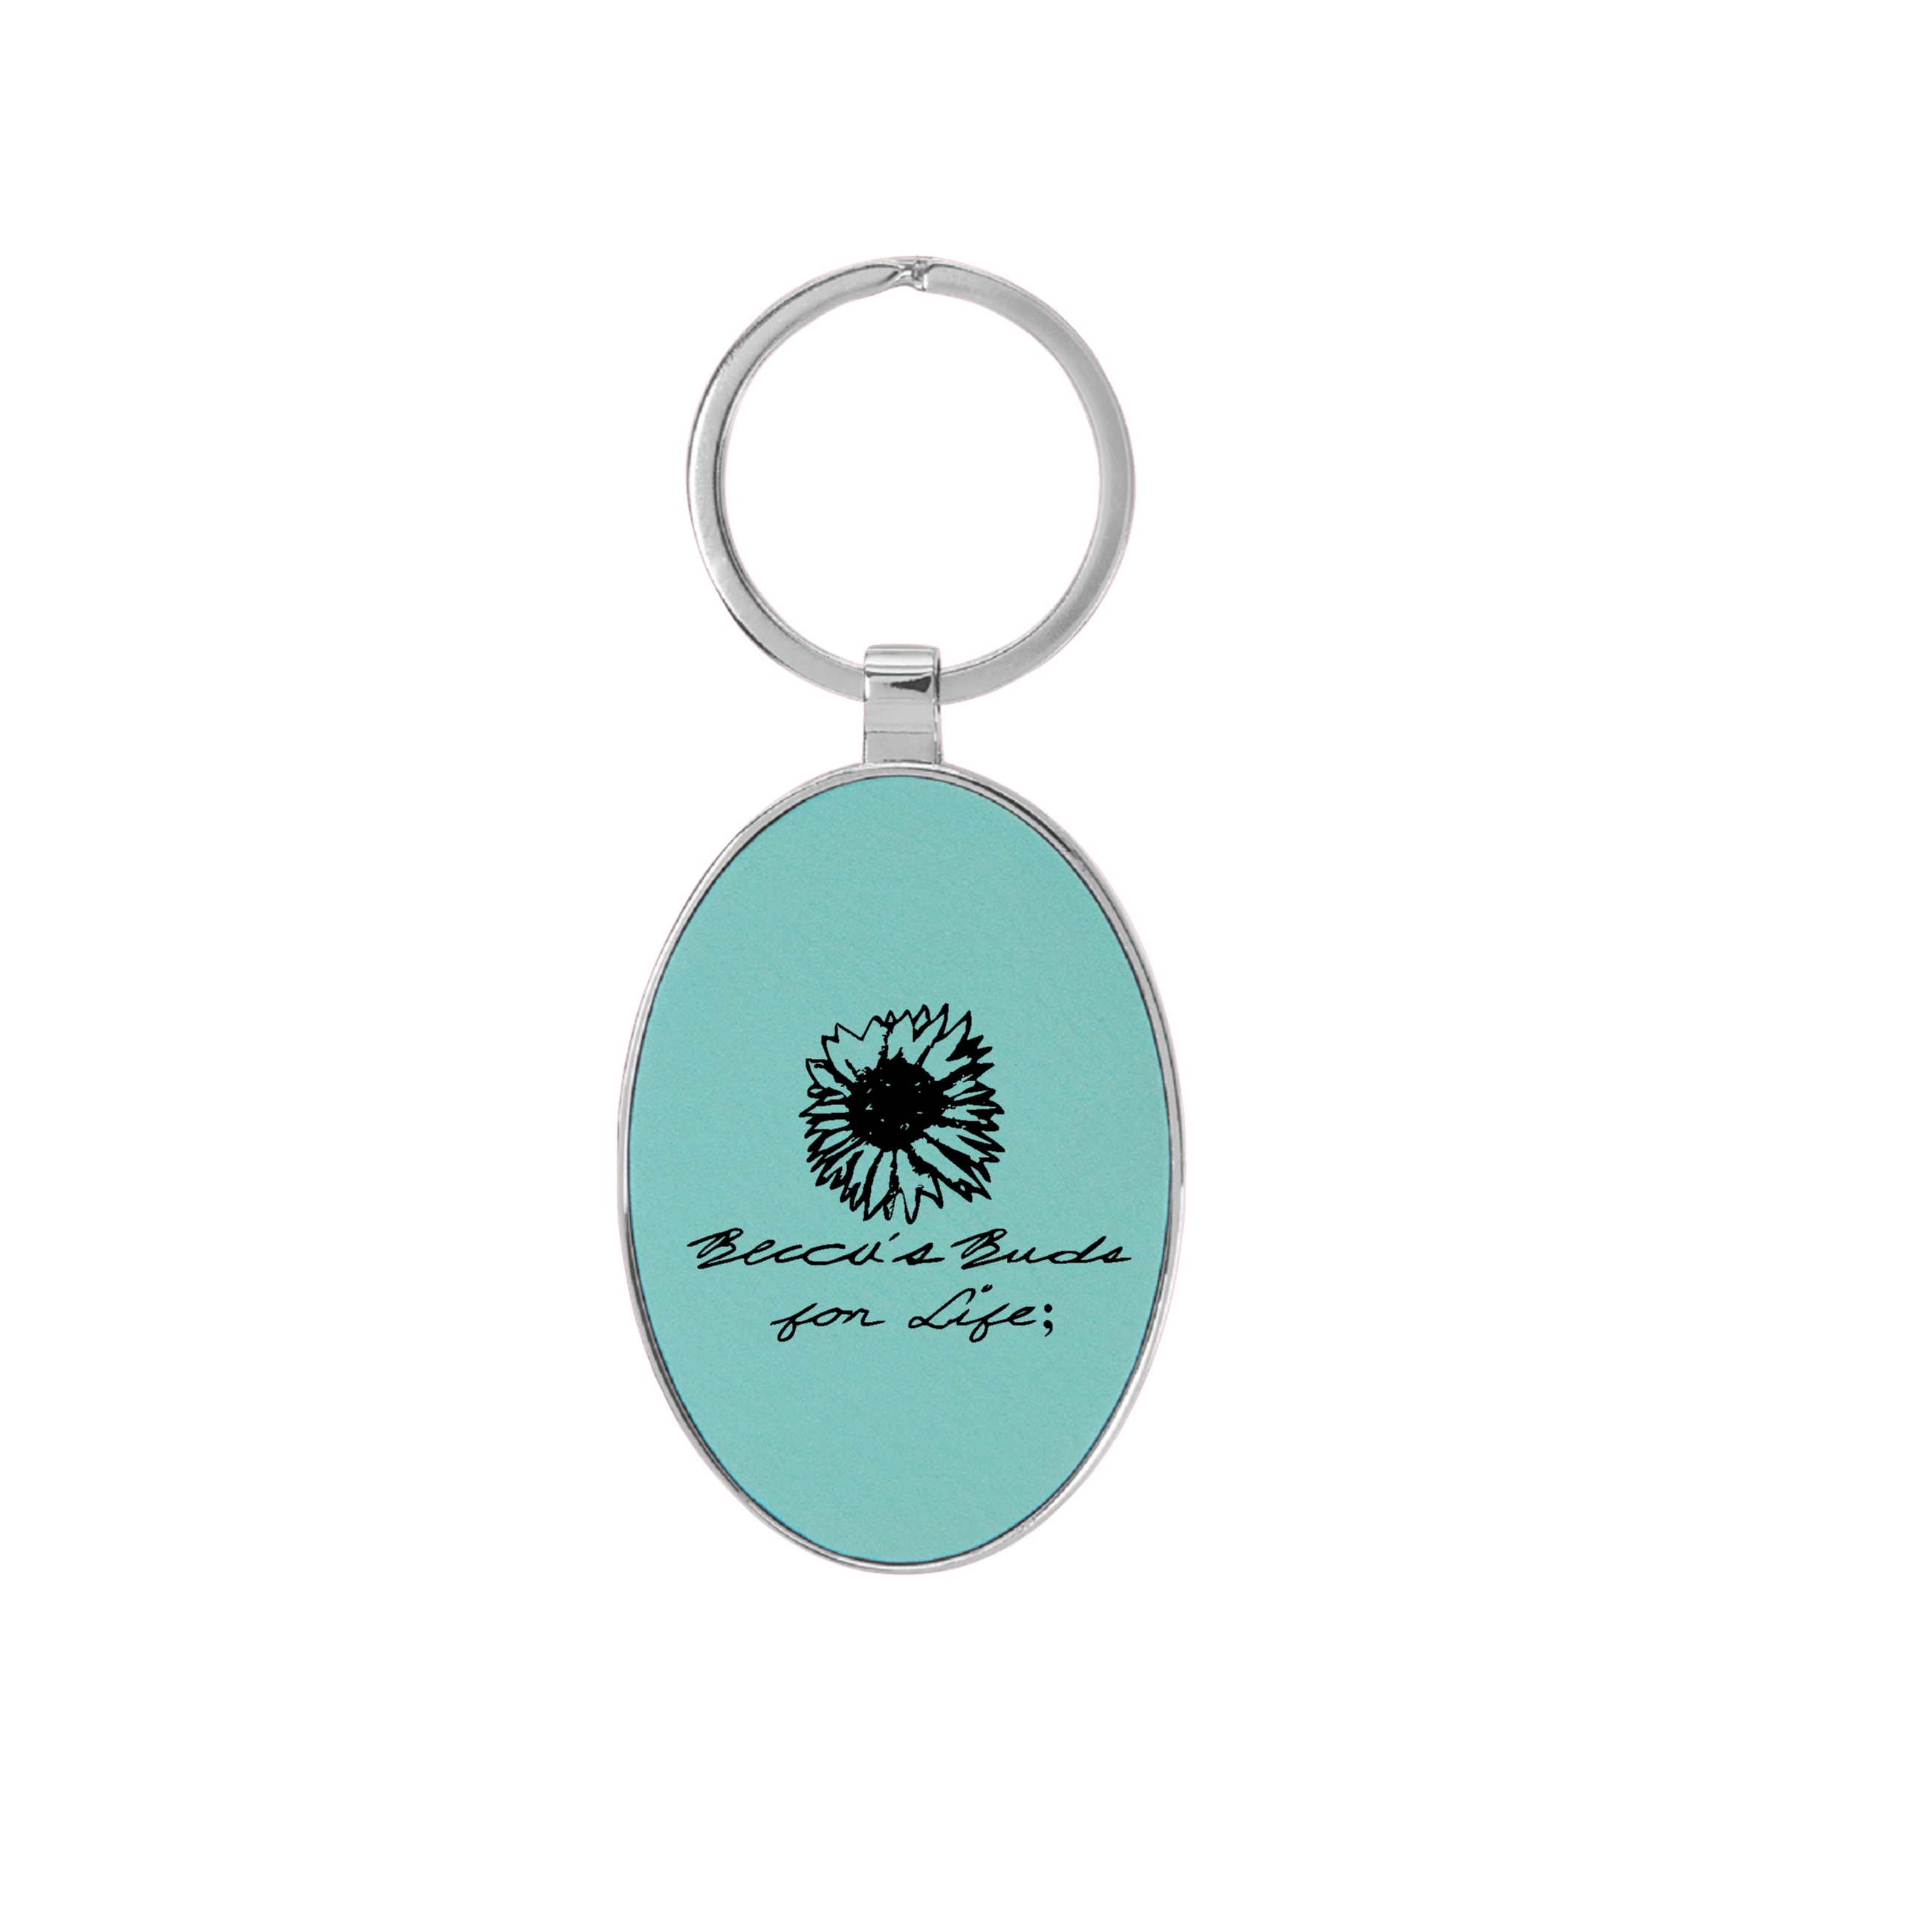 Beccas Buds For Life Teal Keychain